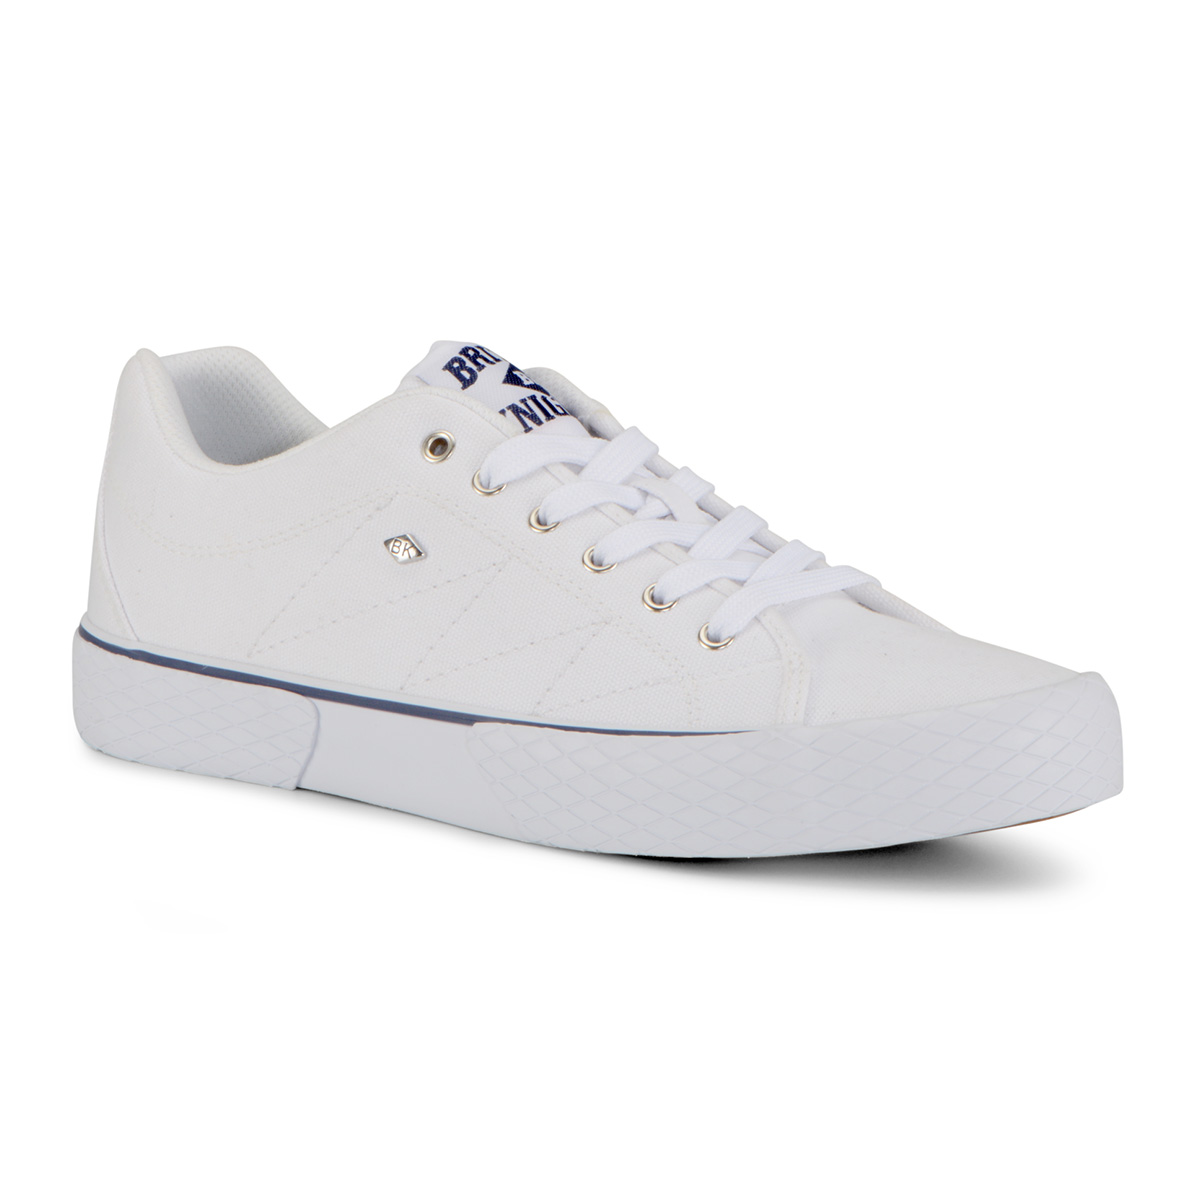 British Knights Men's Vulture 2 Canvas Sneaker Shoes - image 1 of 7